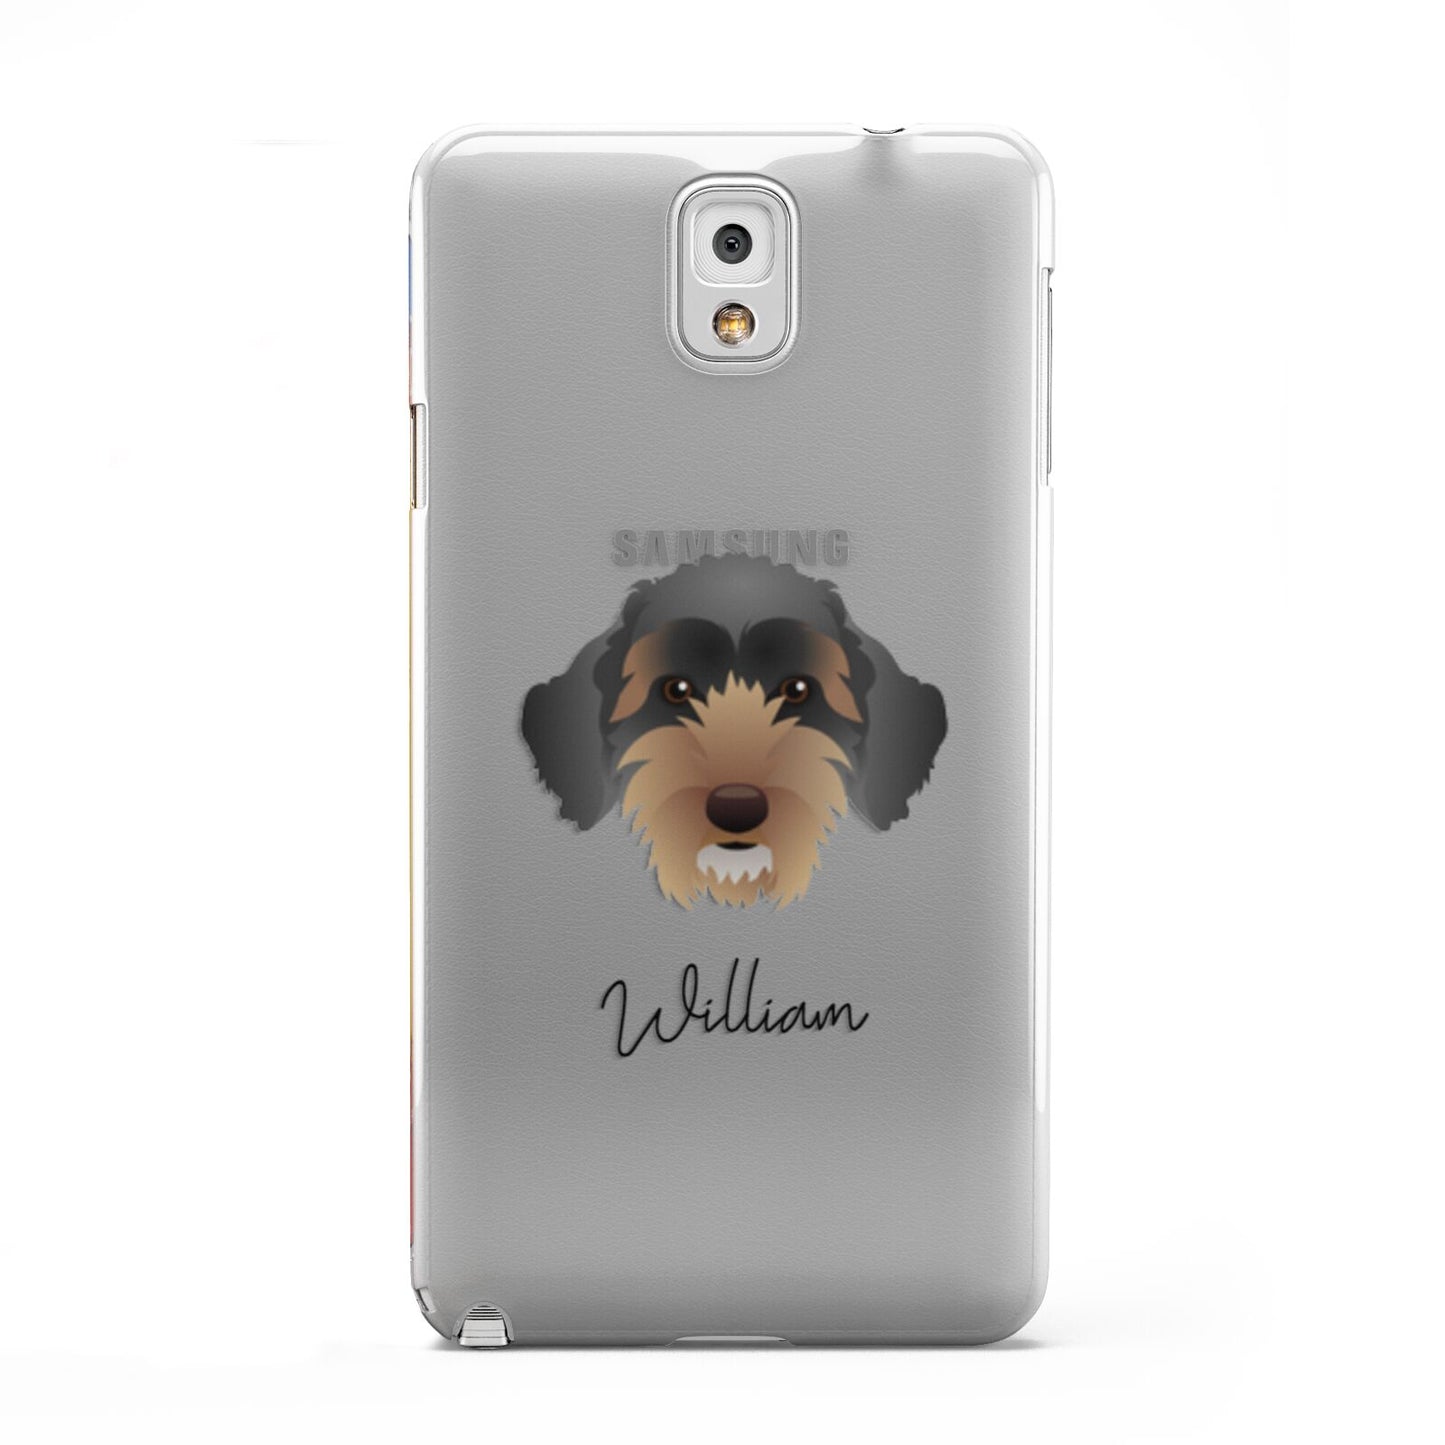 Sproodle Personalised Samsung Galaxy Note 3 Case